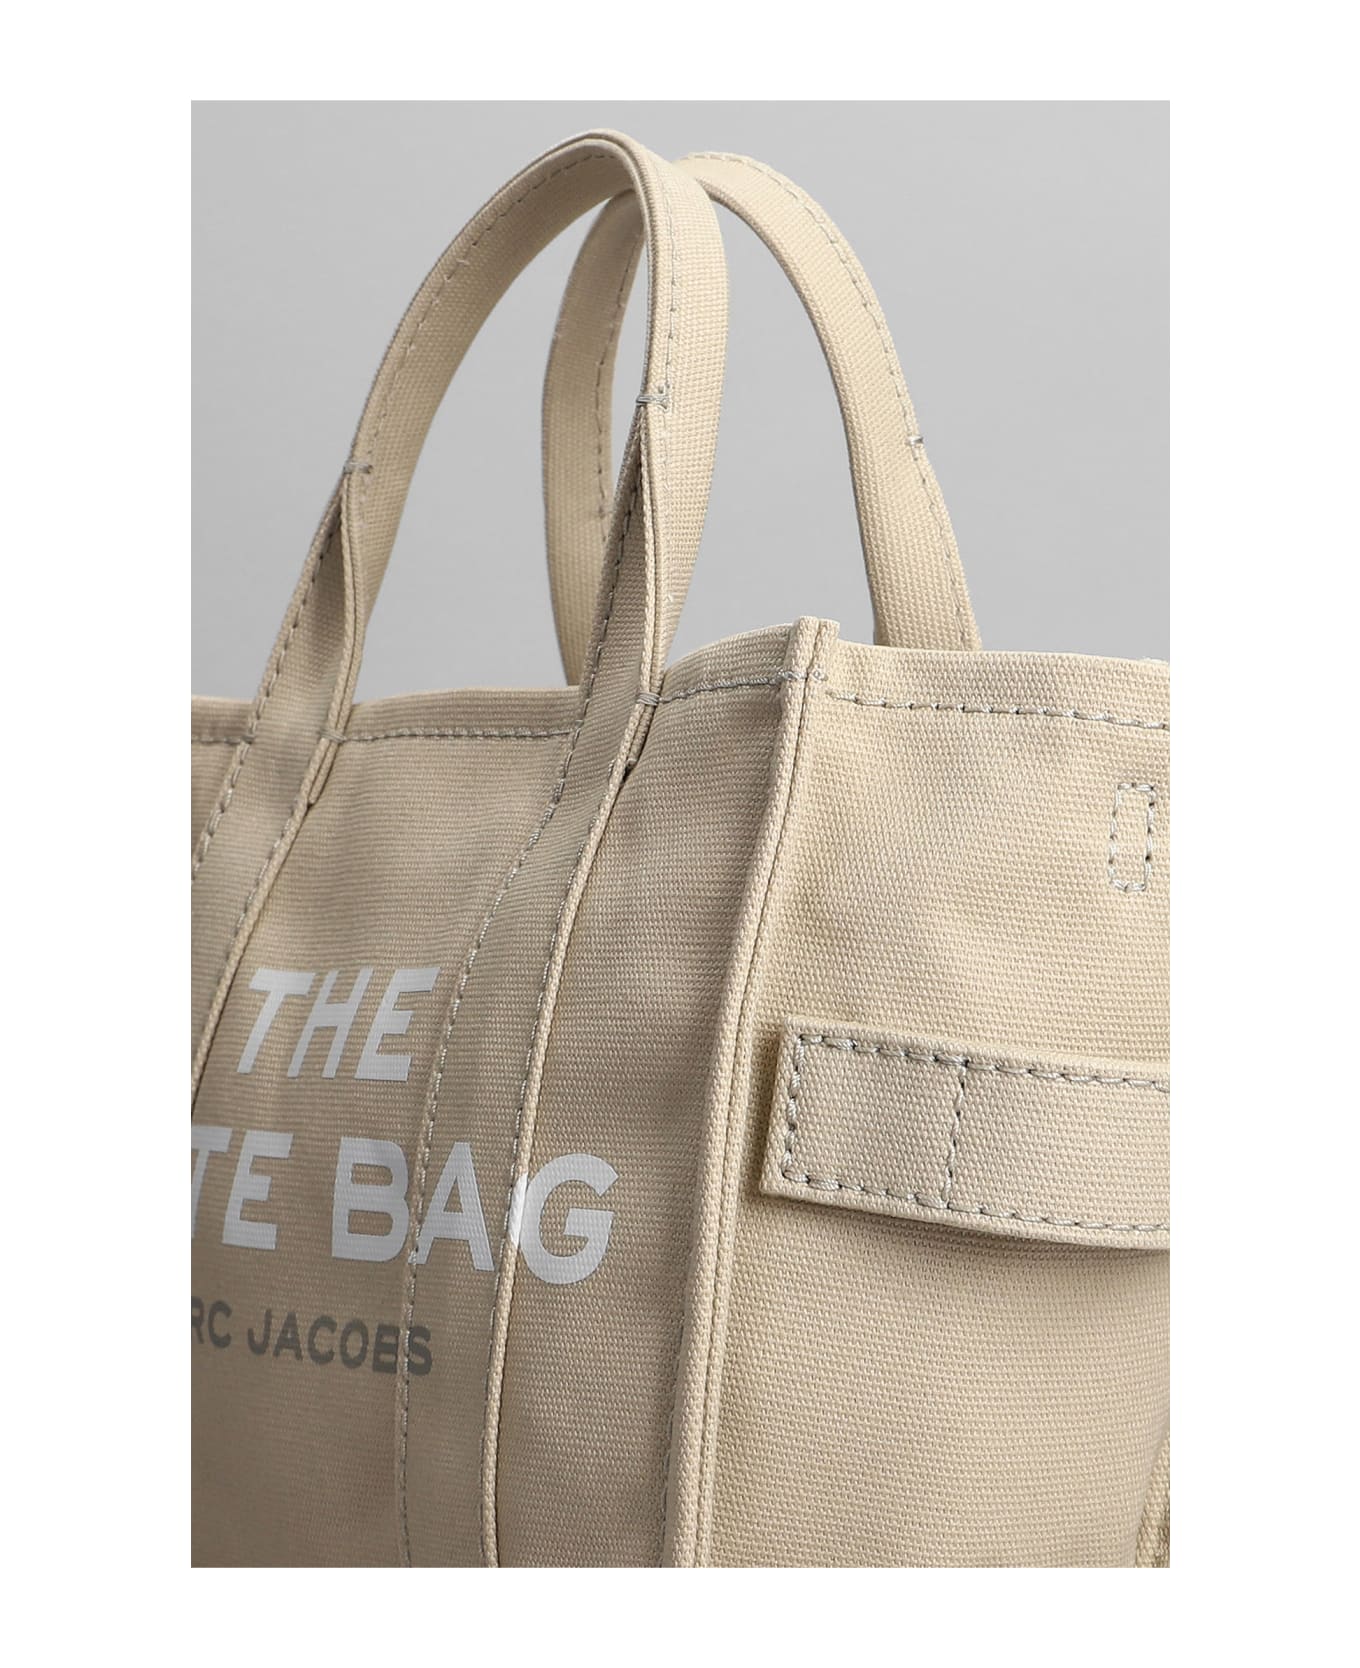 Marc Jacobs Tote In Beige Canvas - beige